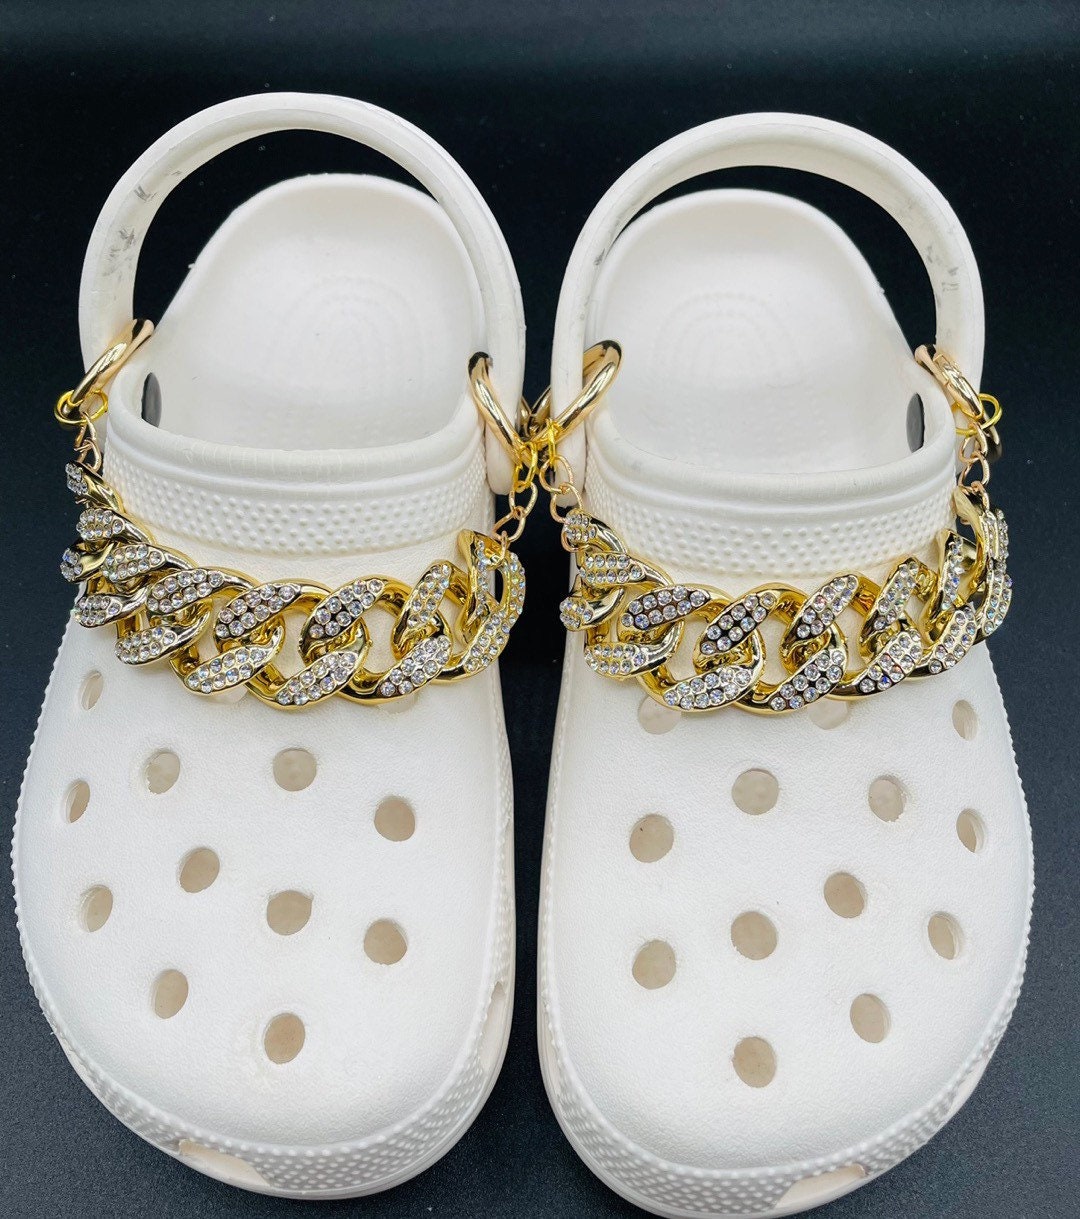 Crocs Pearl Accessories Charms of Shoe Decoration. Charms for Your Crocs, Croc  Accessories for Girls and Adult Women 